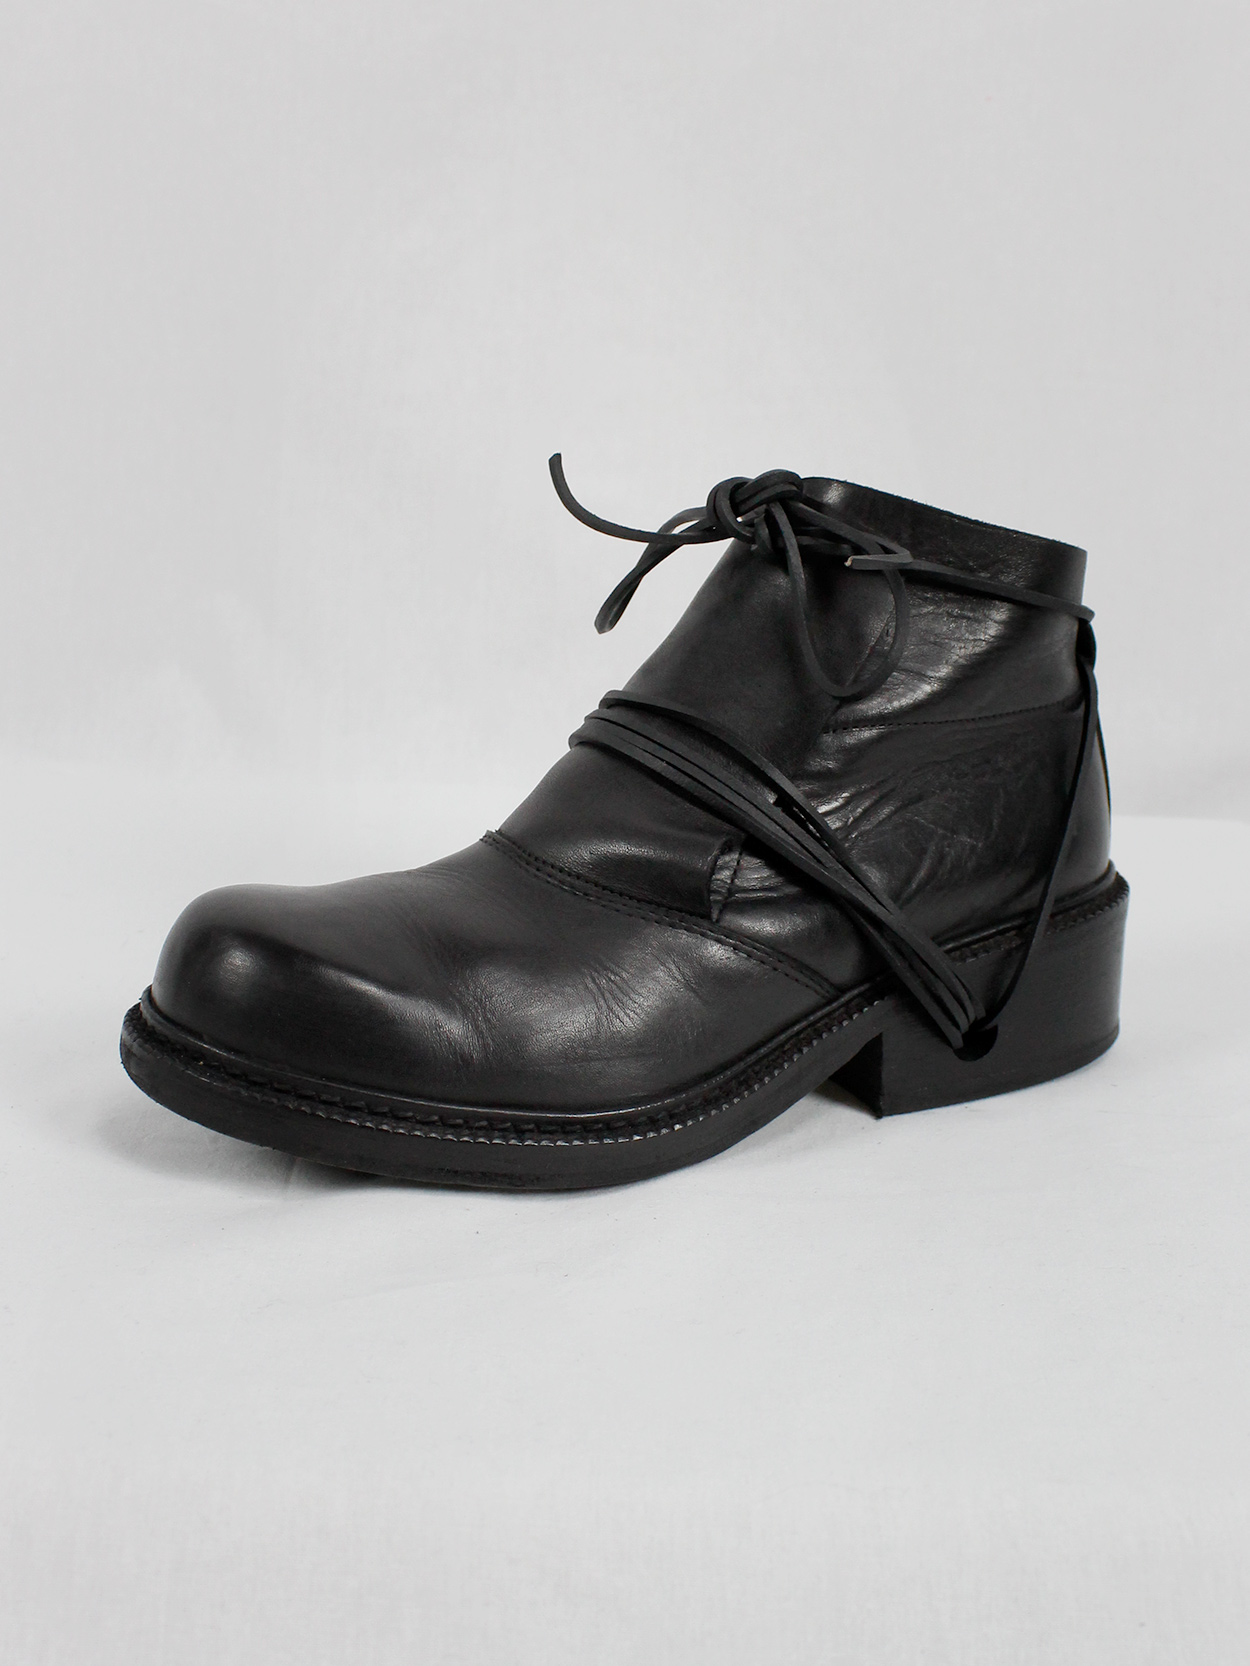 vaniitas Dirk Bikkembergs black boots with flap and laces through the soles fall 1994 (13)